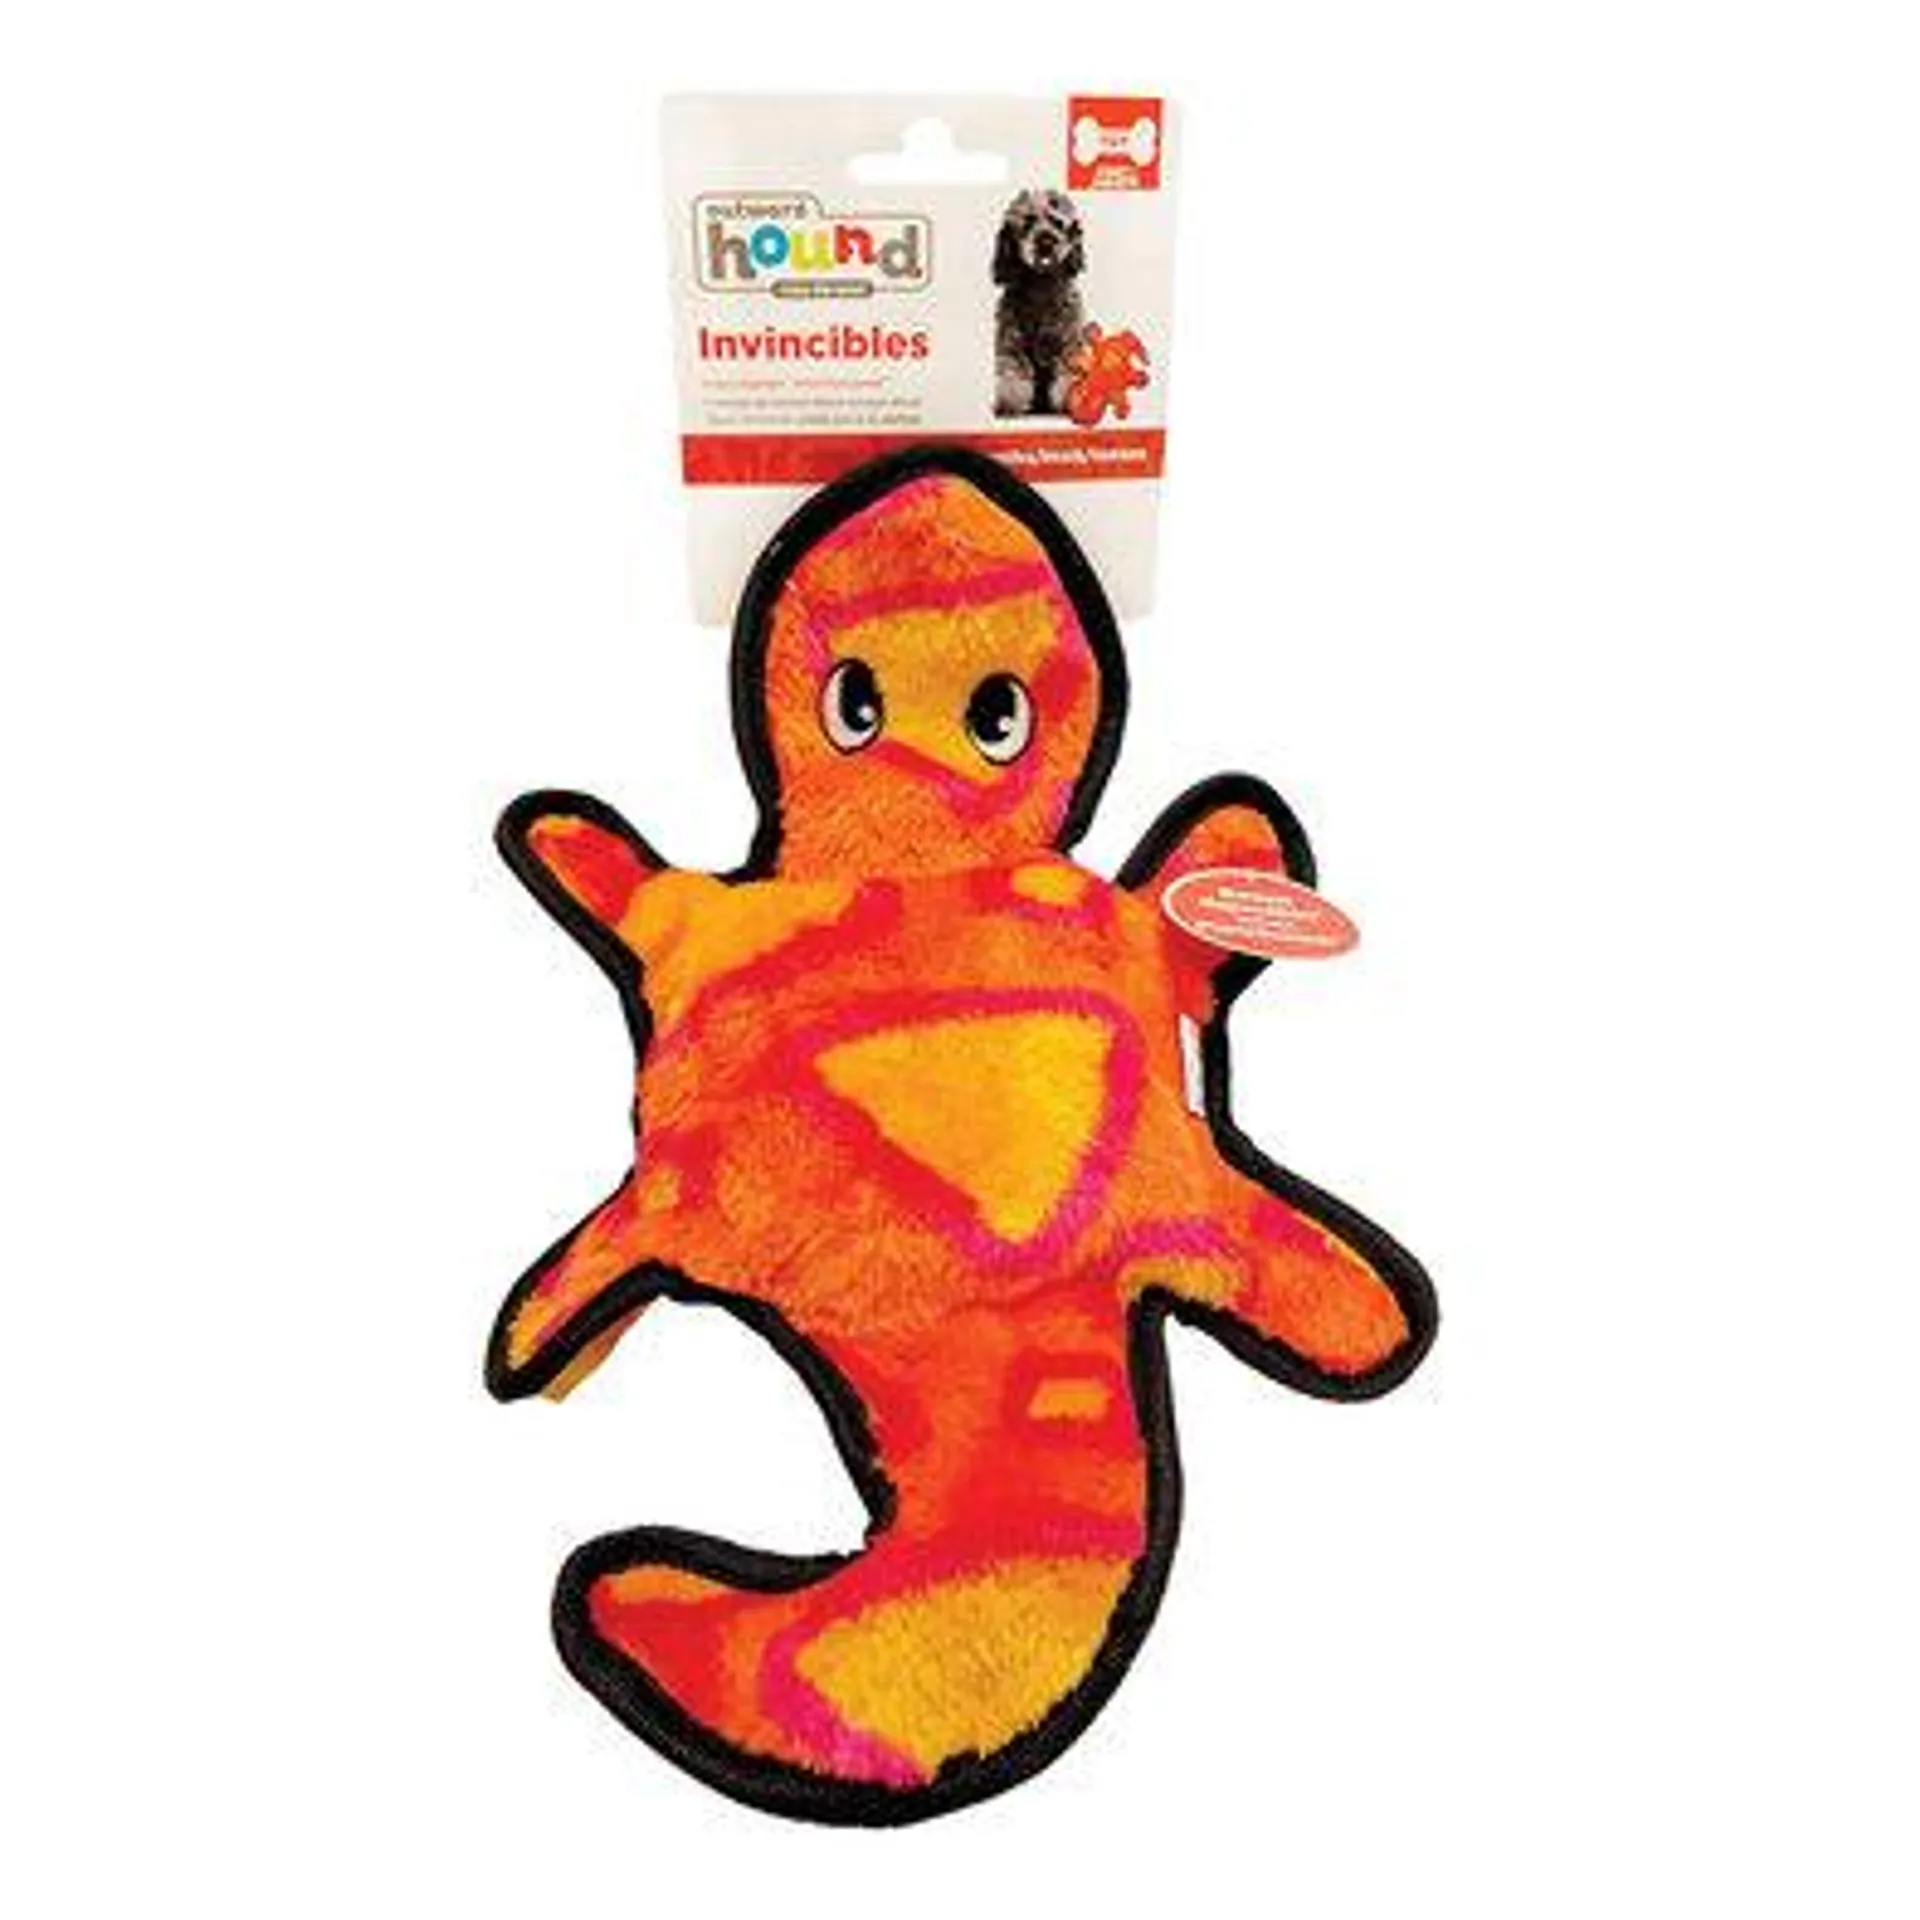 Outward Hound, Invincible Gecko, 2 Squeakers - Red/Orange